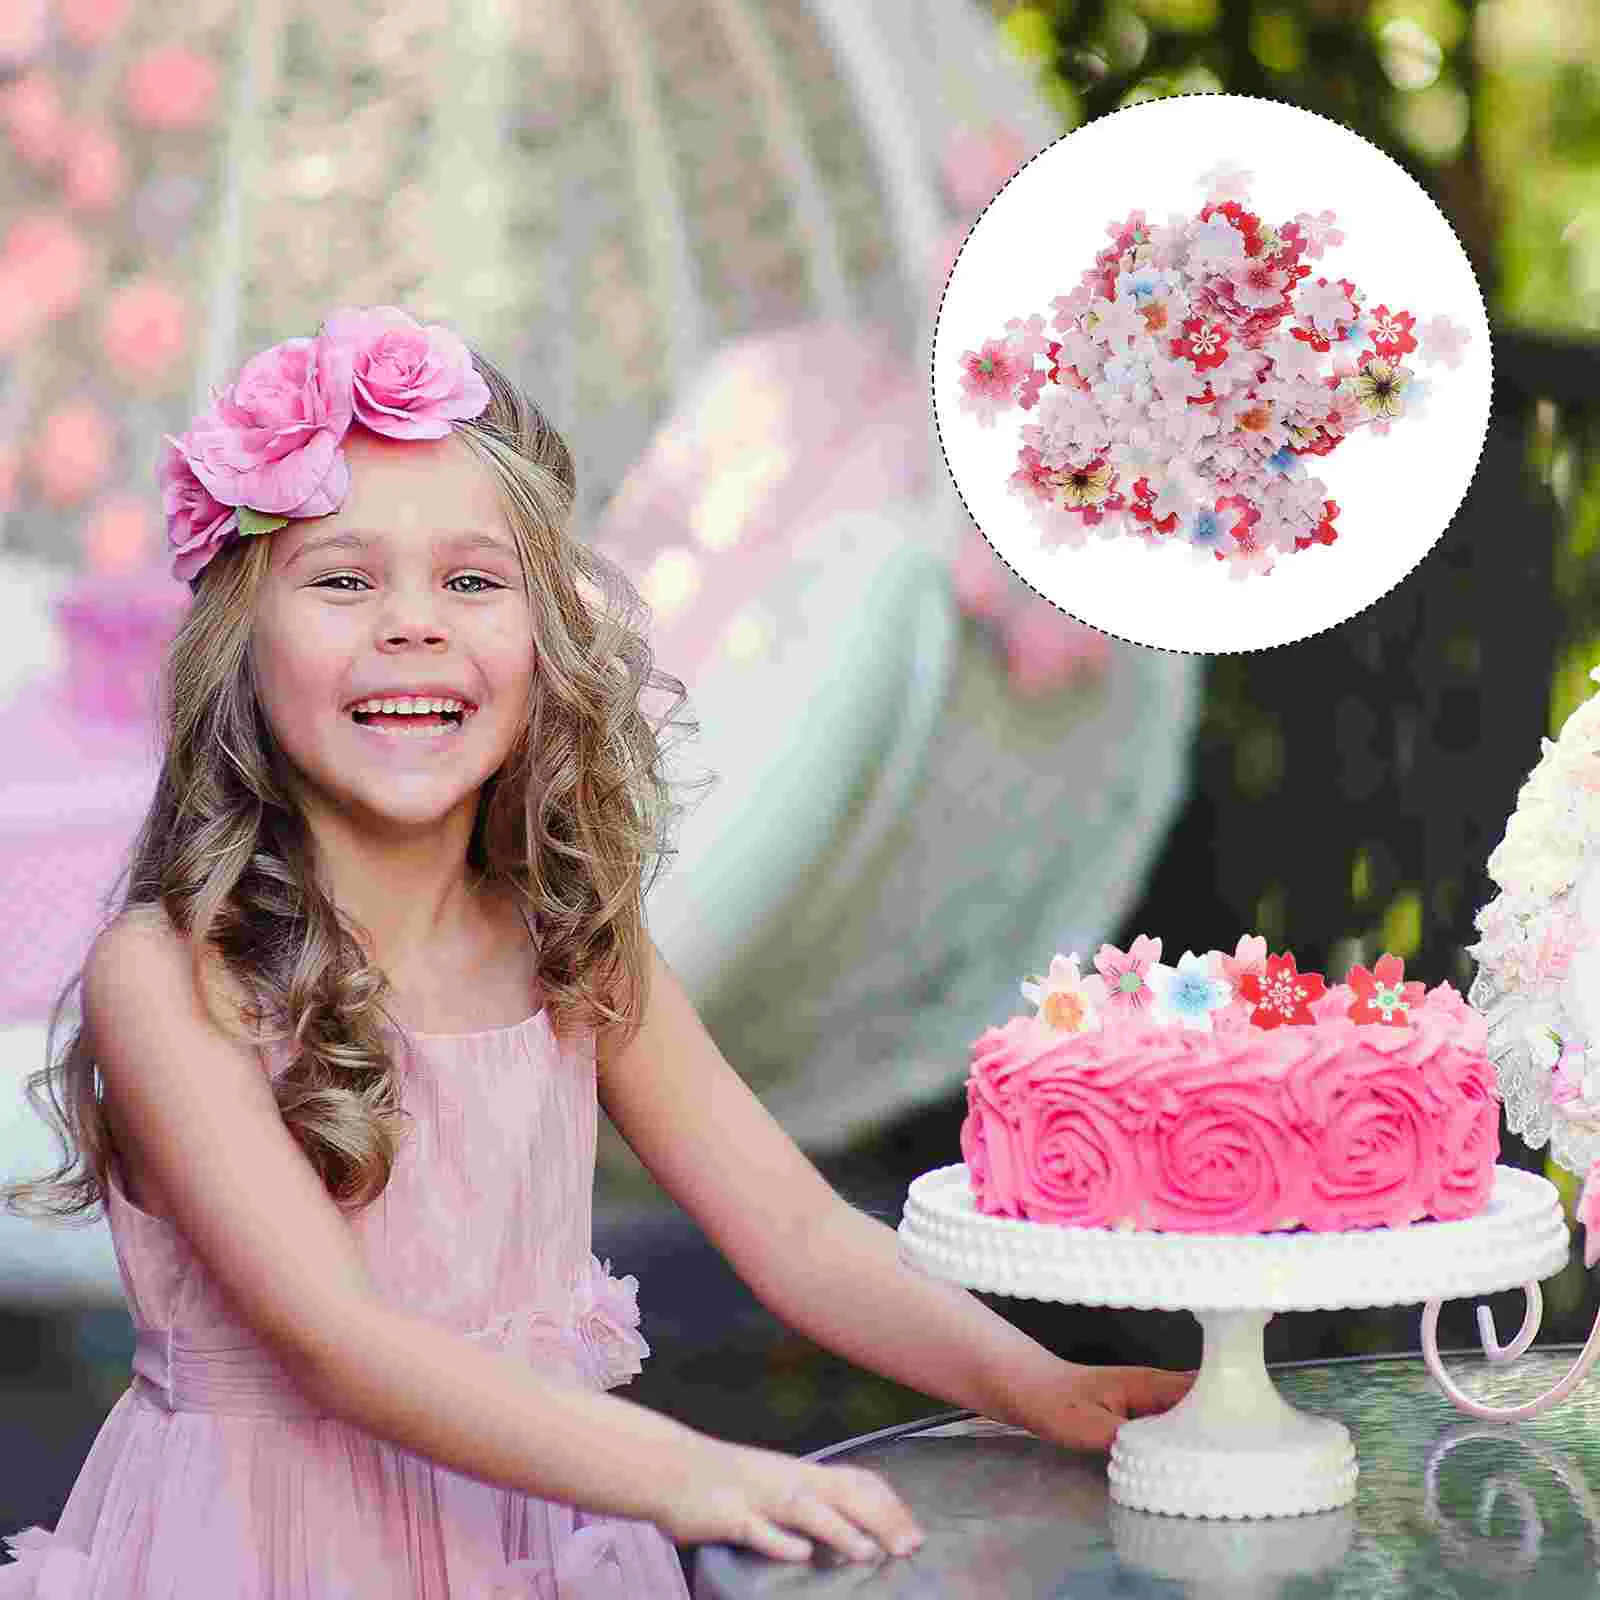 

Edible Cupcake Toppers Cake: Blossoms Flower Cake Decor Glutinous Paper Decorations for Dessert Donut Pastry Decor